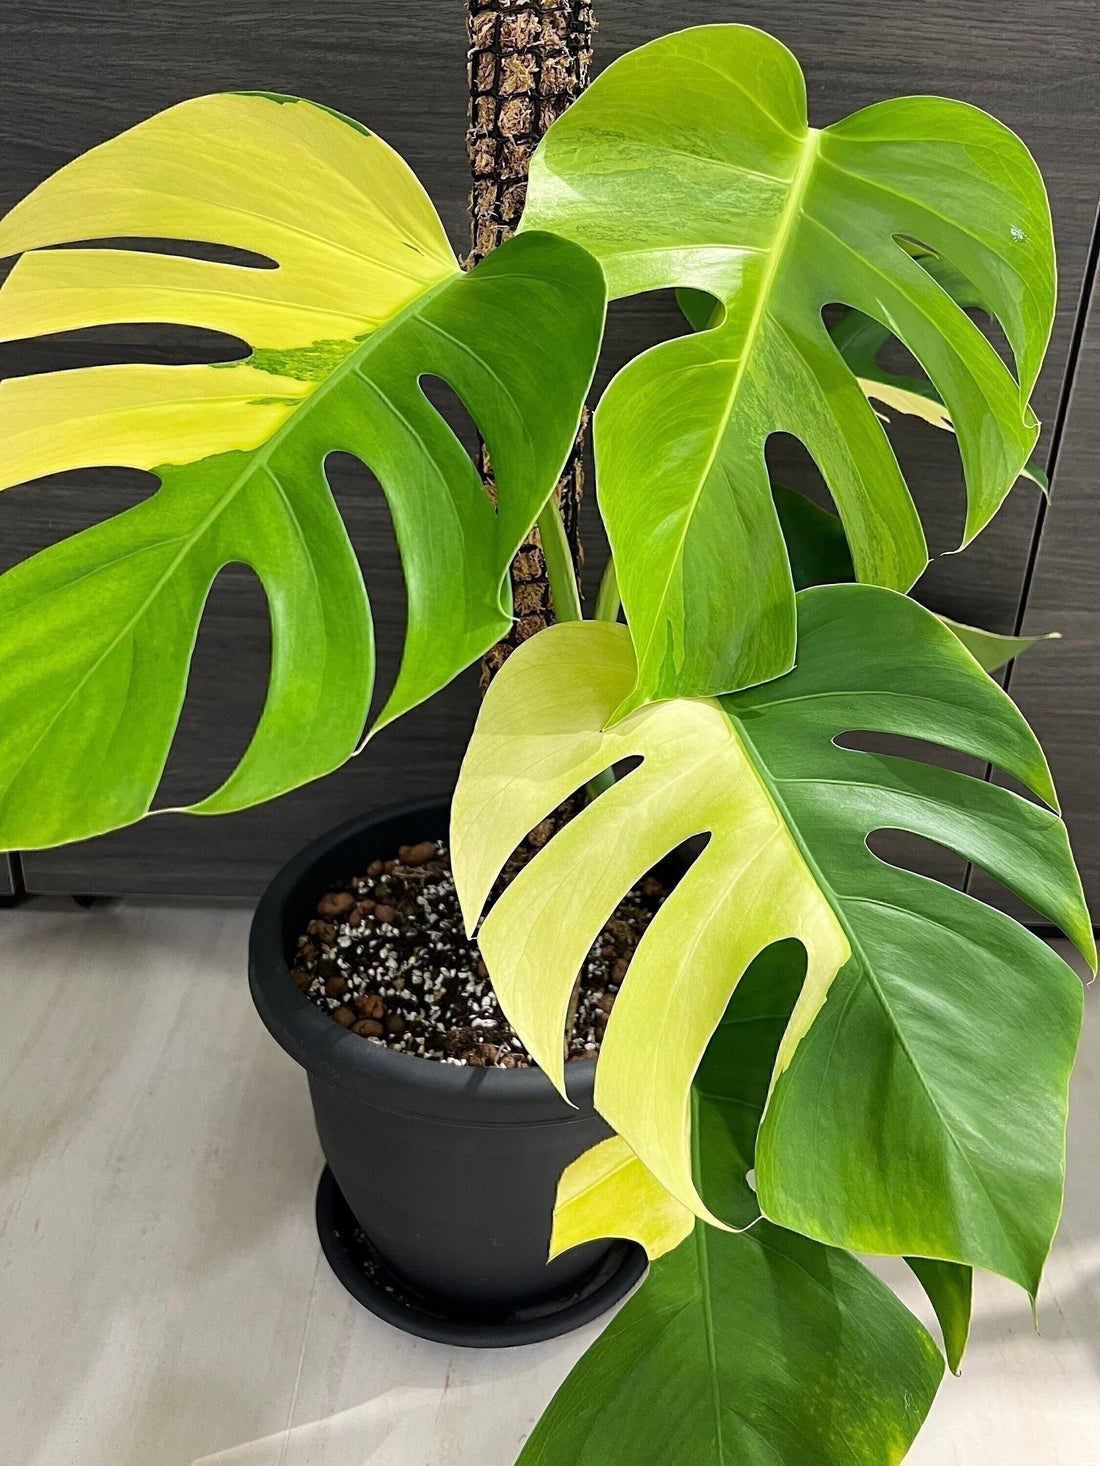 How can I make money by growing Monstera aurea variagated?